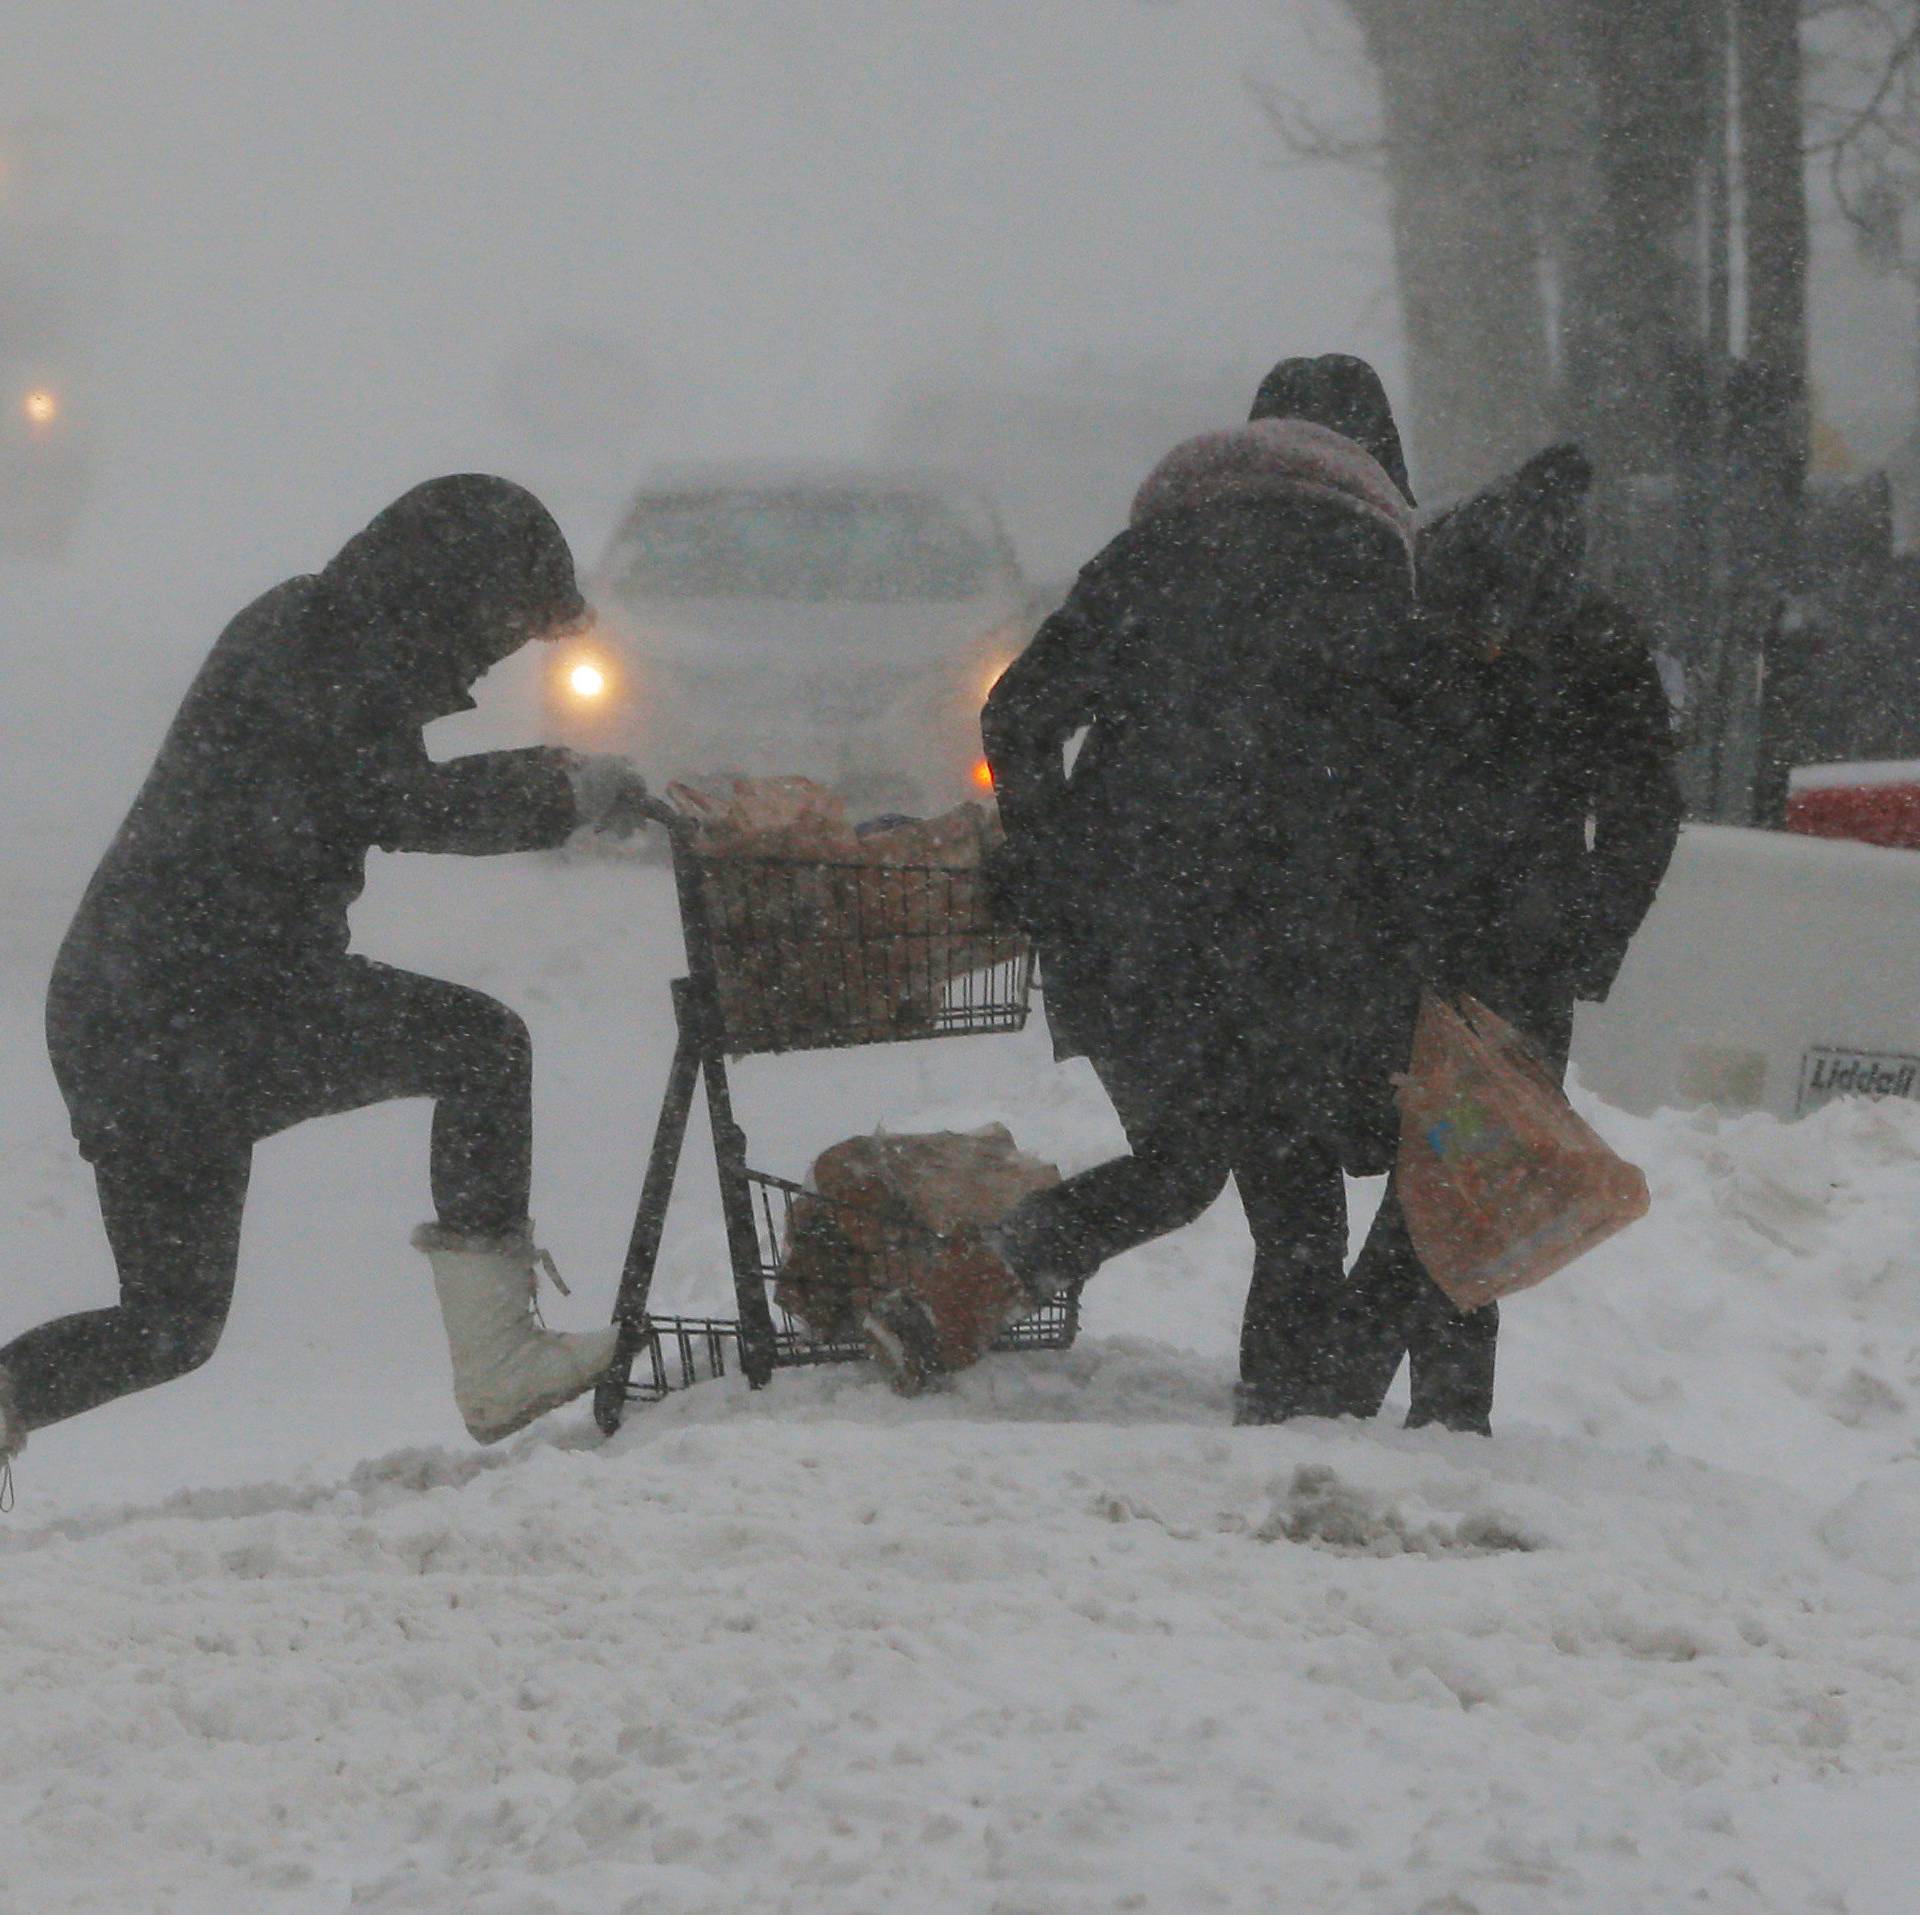 People push a shopping cart carrying firewood over a snow bank during Storm Grayson in Boston